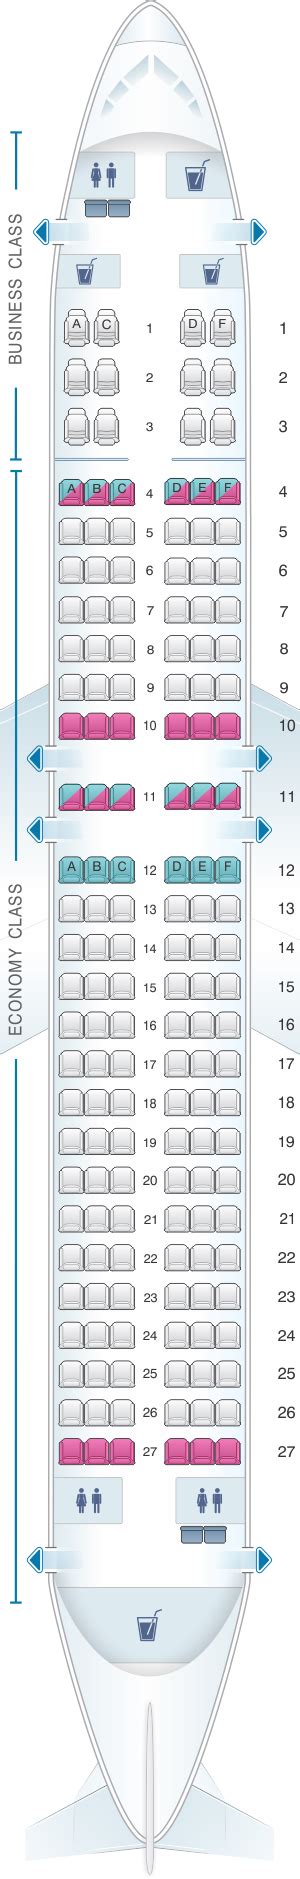 Seat Map Rossiya Airlines Airbus A320 156pax Malaysia Airlines